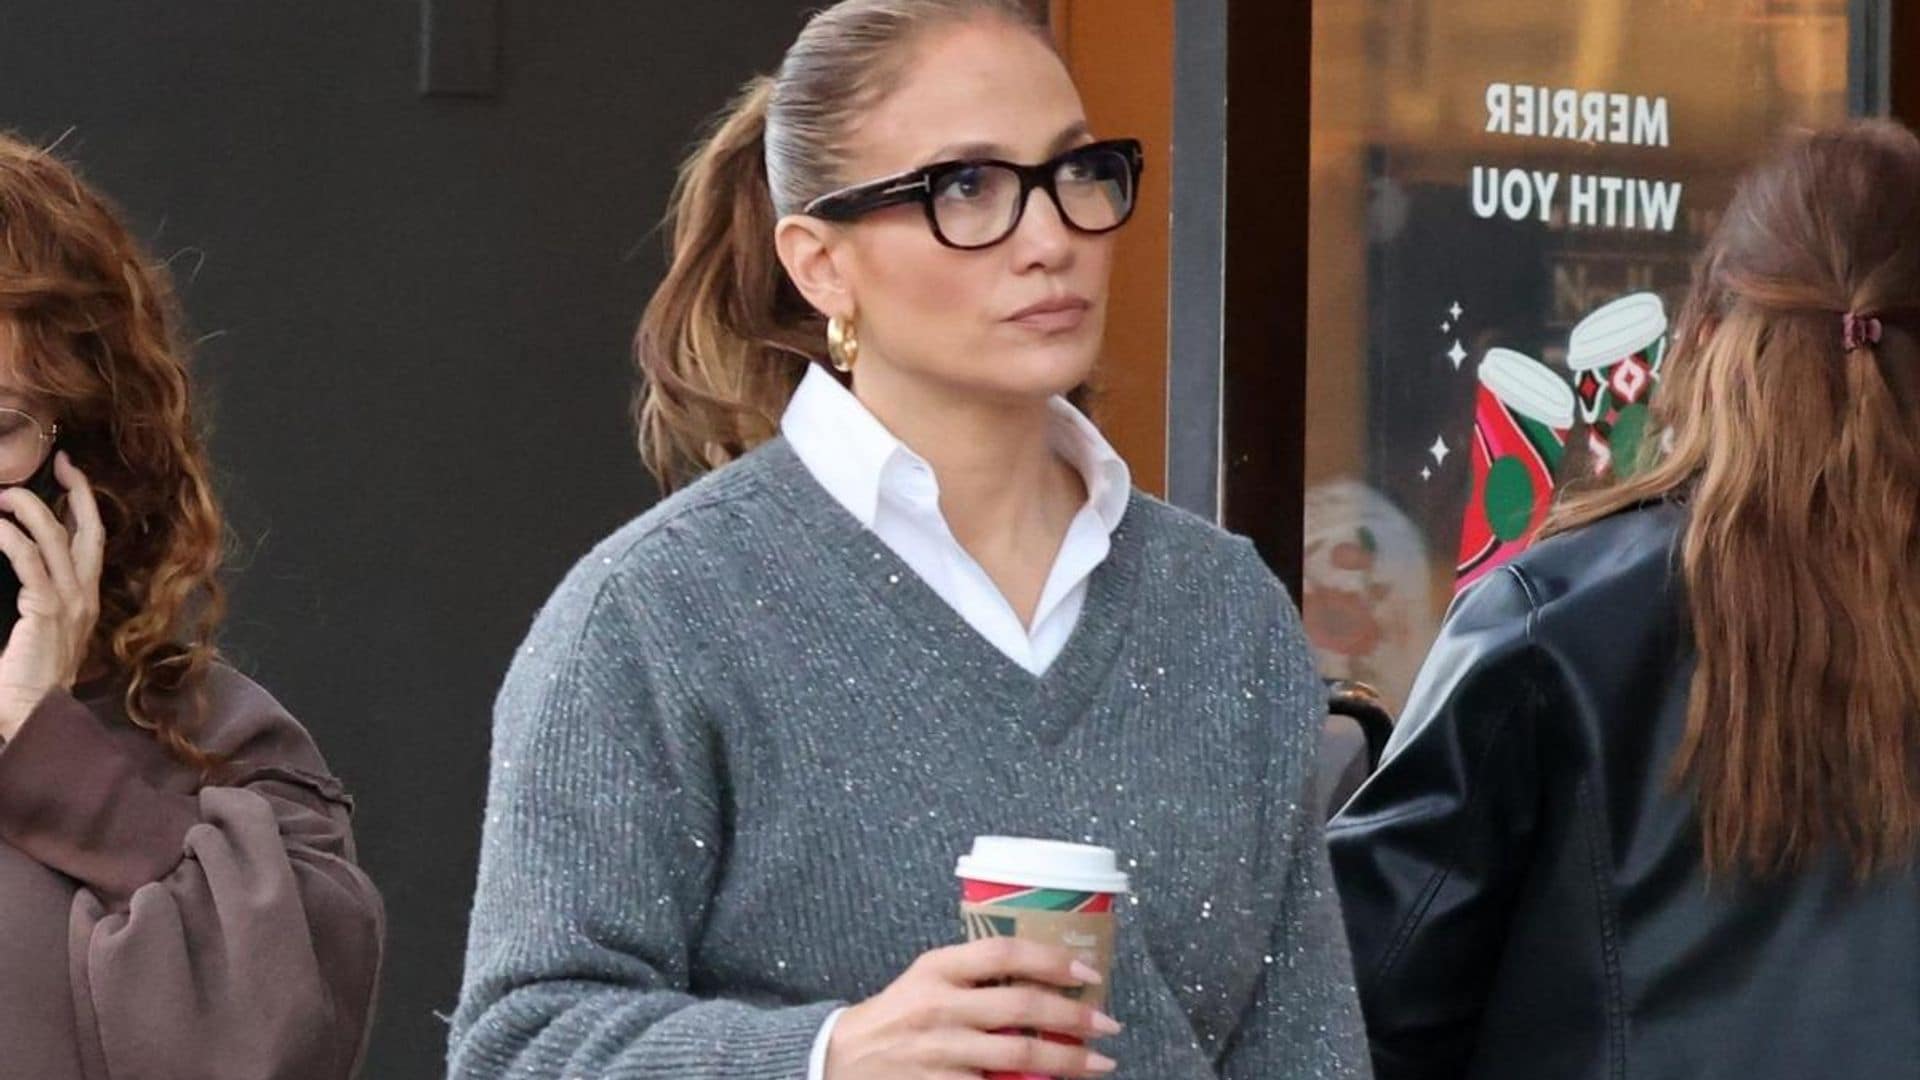 Jennifer Lopez steps out in preppy fall look with the perfect accessory